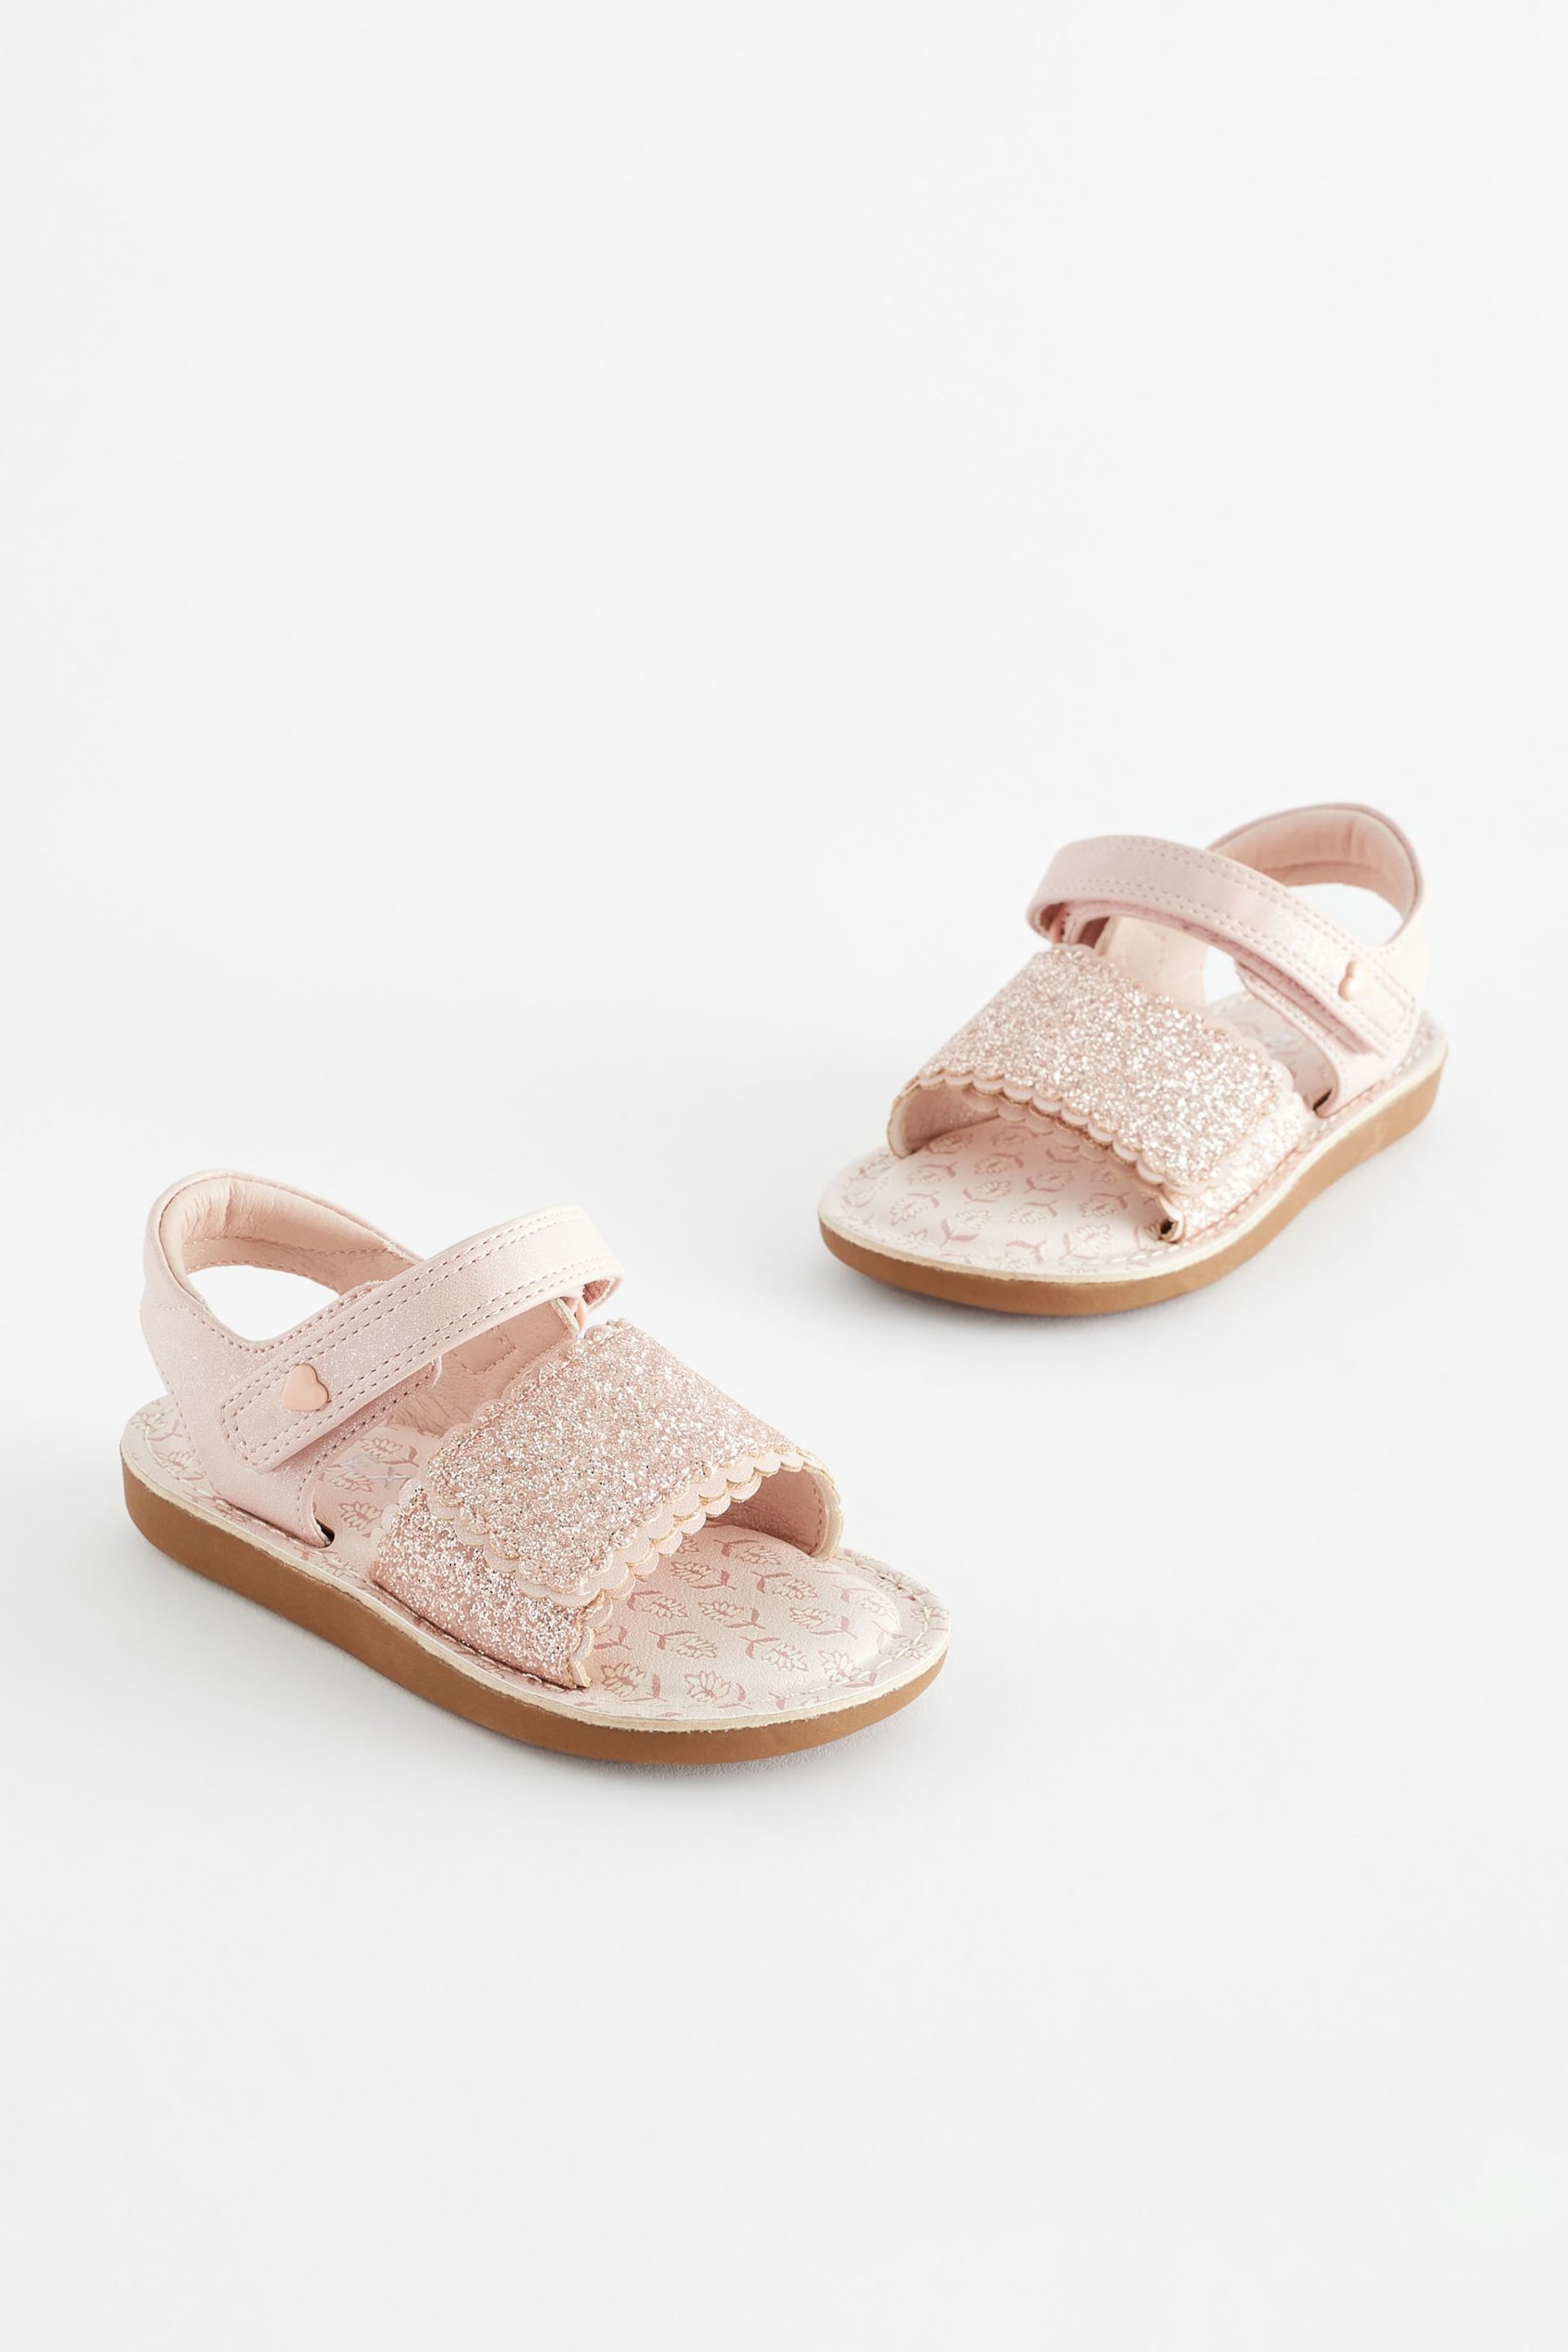 Pink Glitter Occasion Sandals - Image 1 of 7